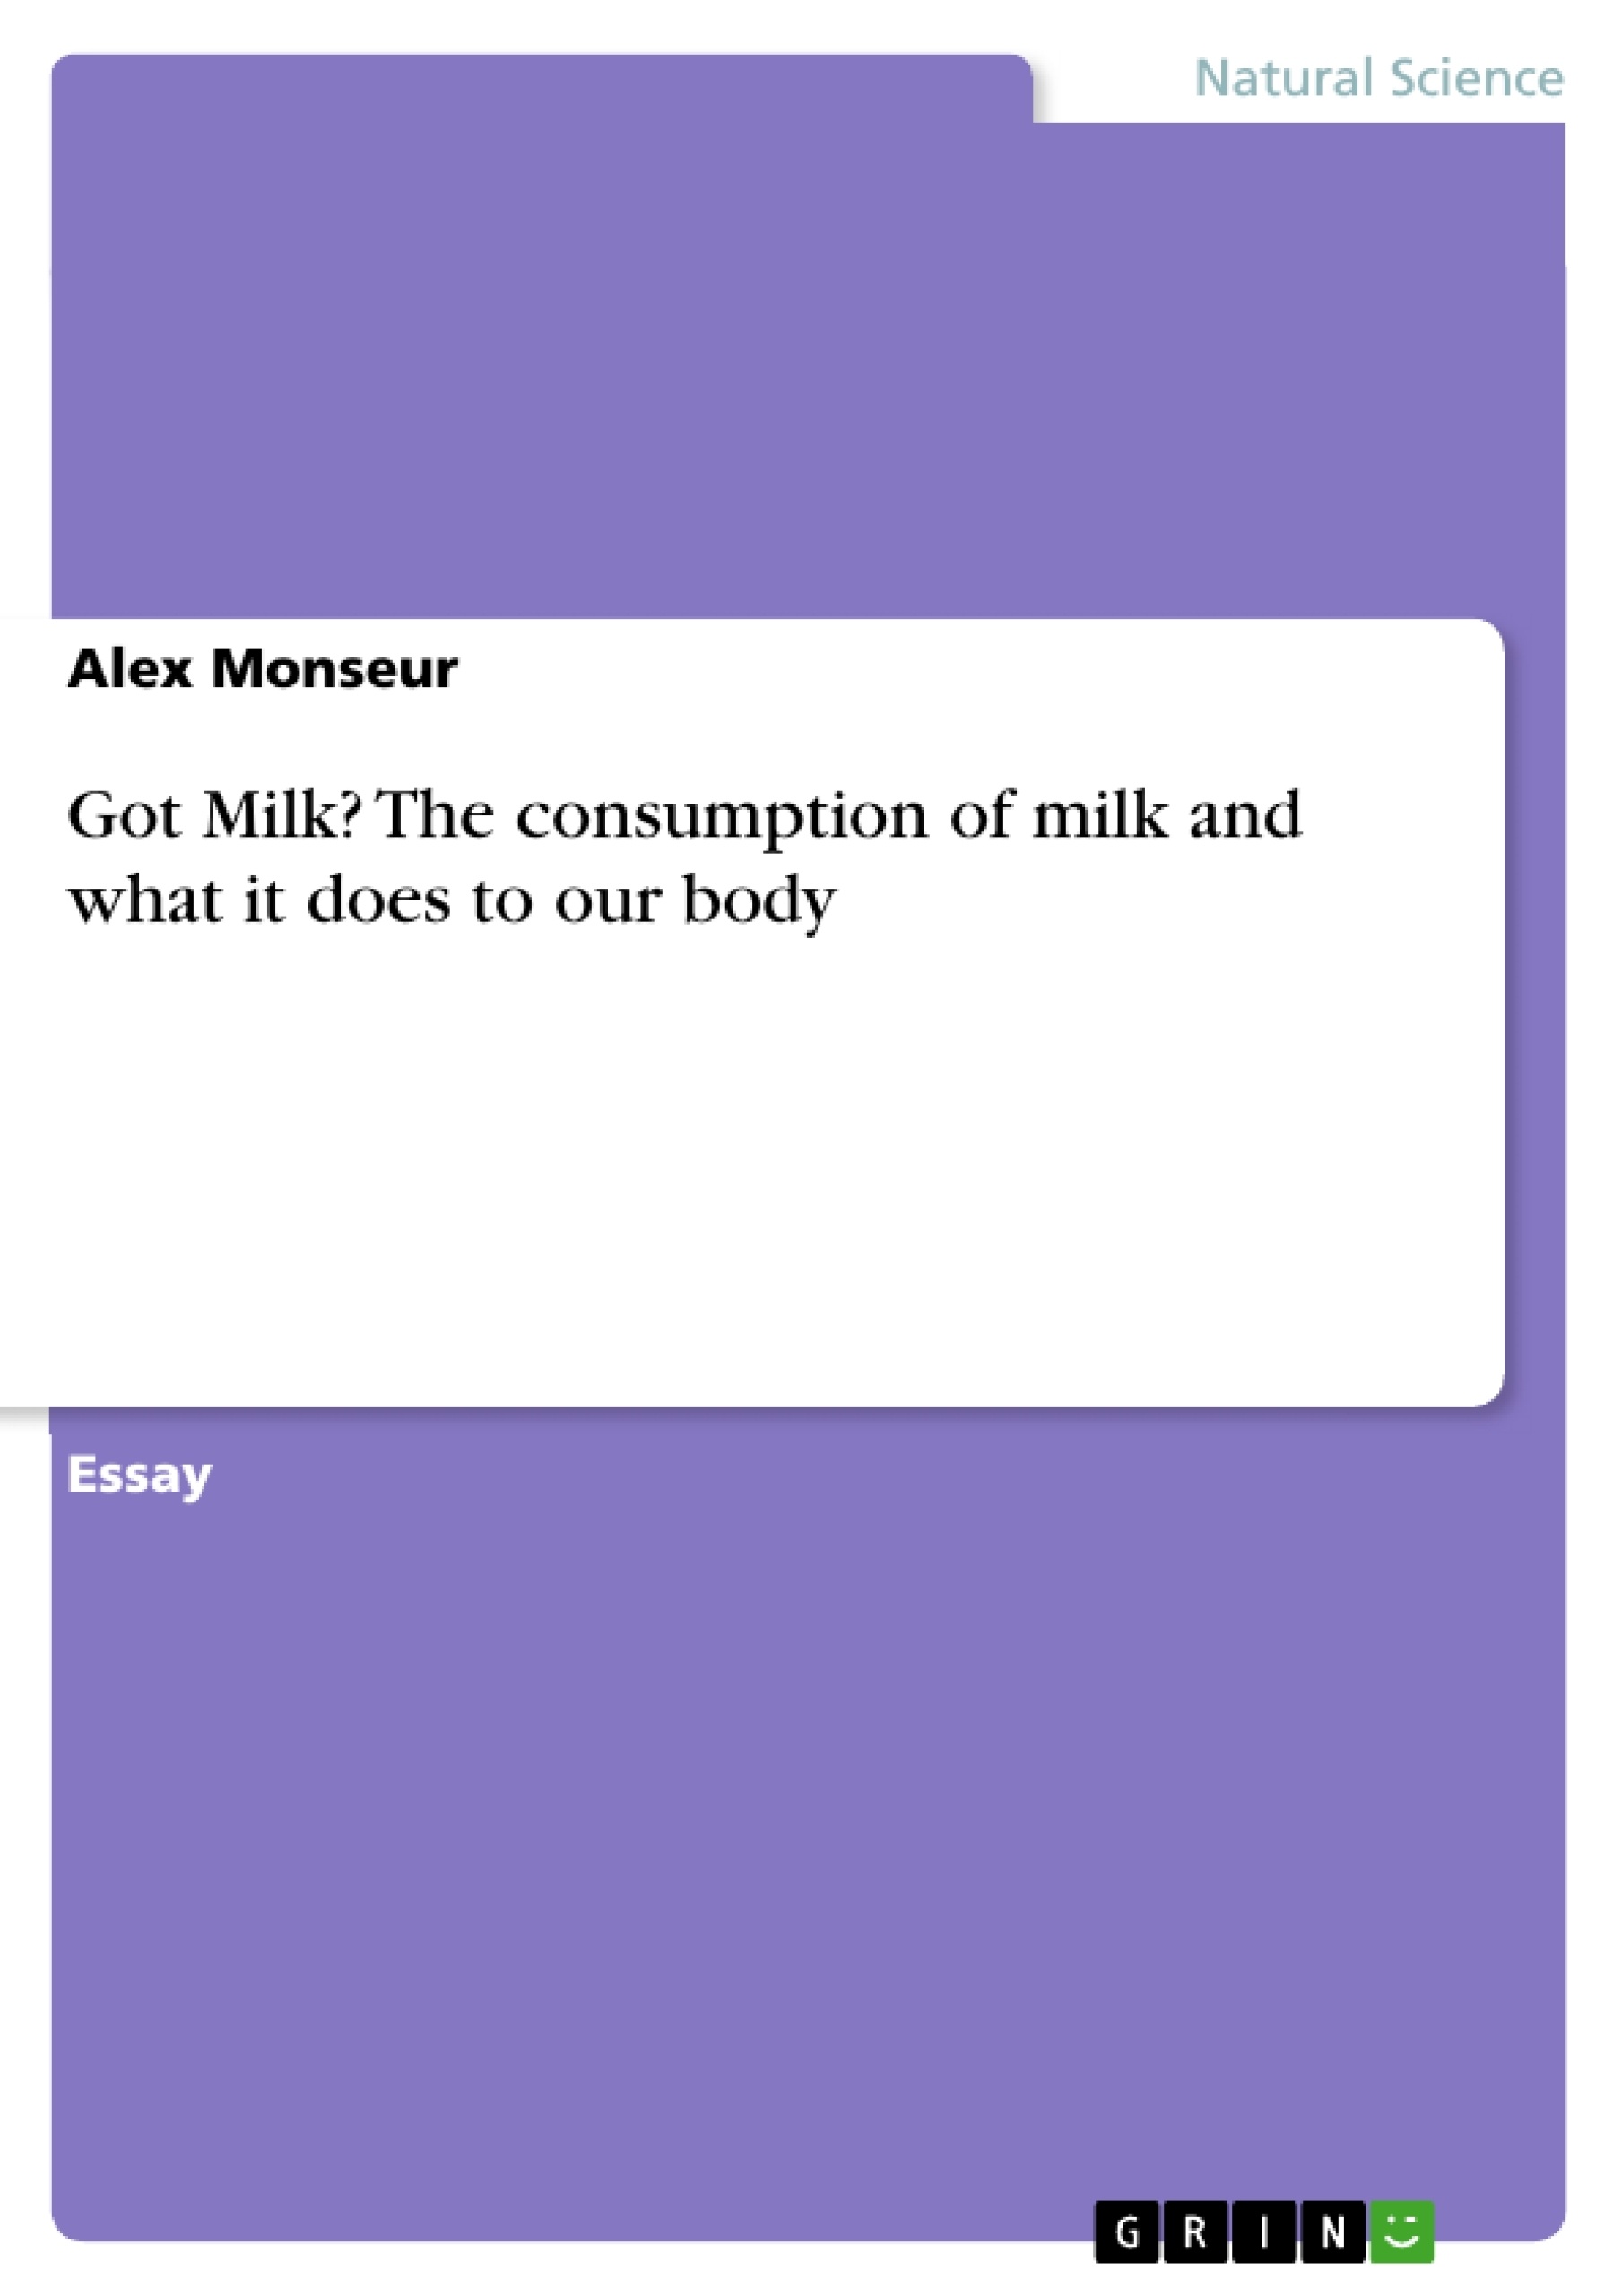 Titre: Got Milk? The consumption of milk and what it does to our body